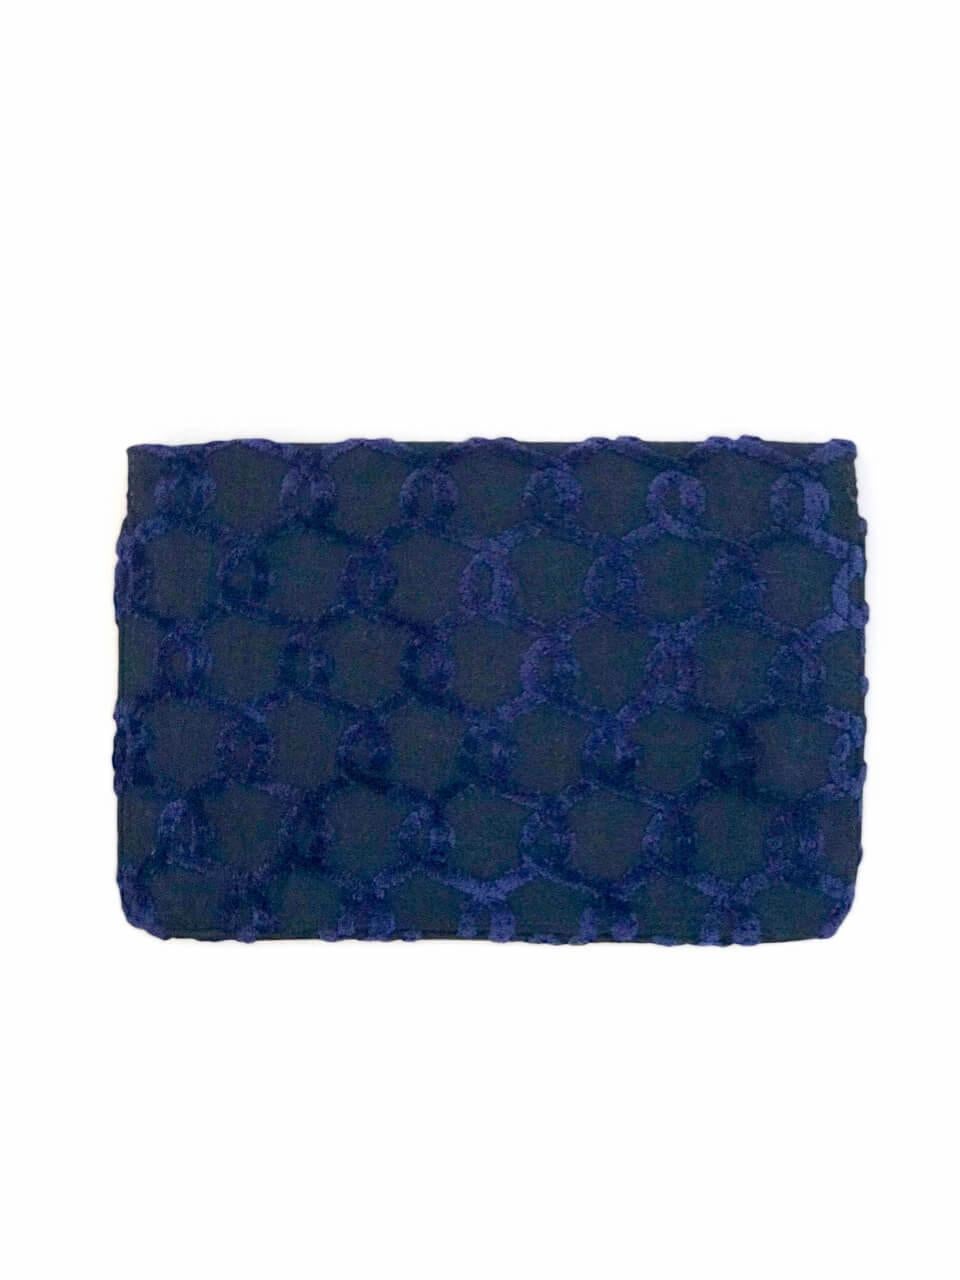 This is a chic blue Roberta di Camerino envelope clutch bag or pochette from the 1970s. The slim design features a linear silhouette and the signature Roberta di Camerino intertwining belts design in a raised gentian blue velvet on a darker navy